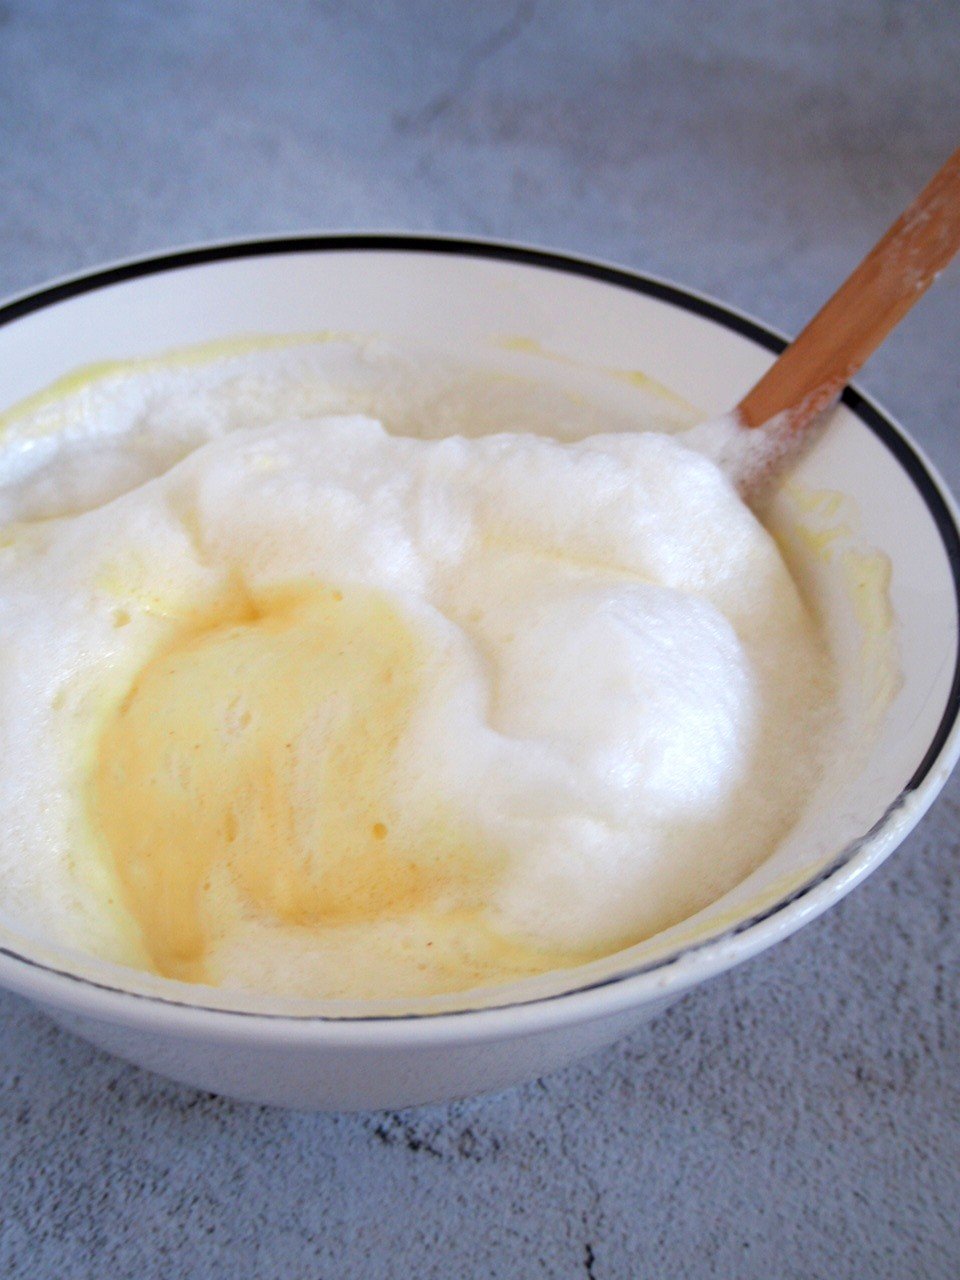 The egg whites and yolk batter being mixed to make the souffle.